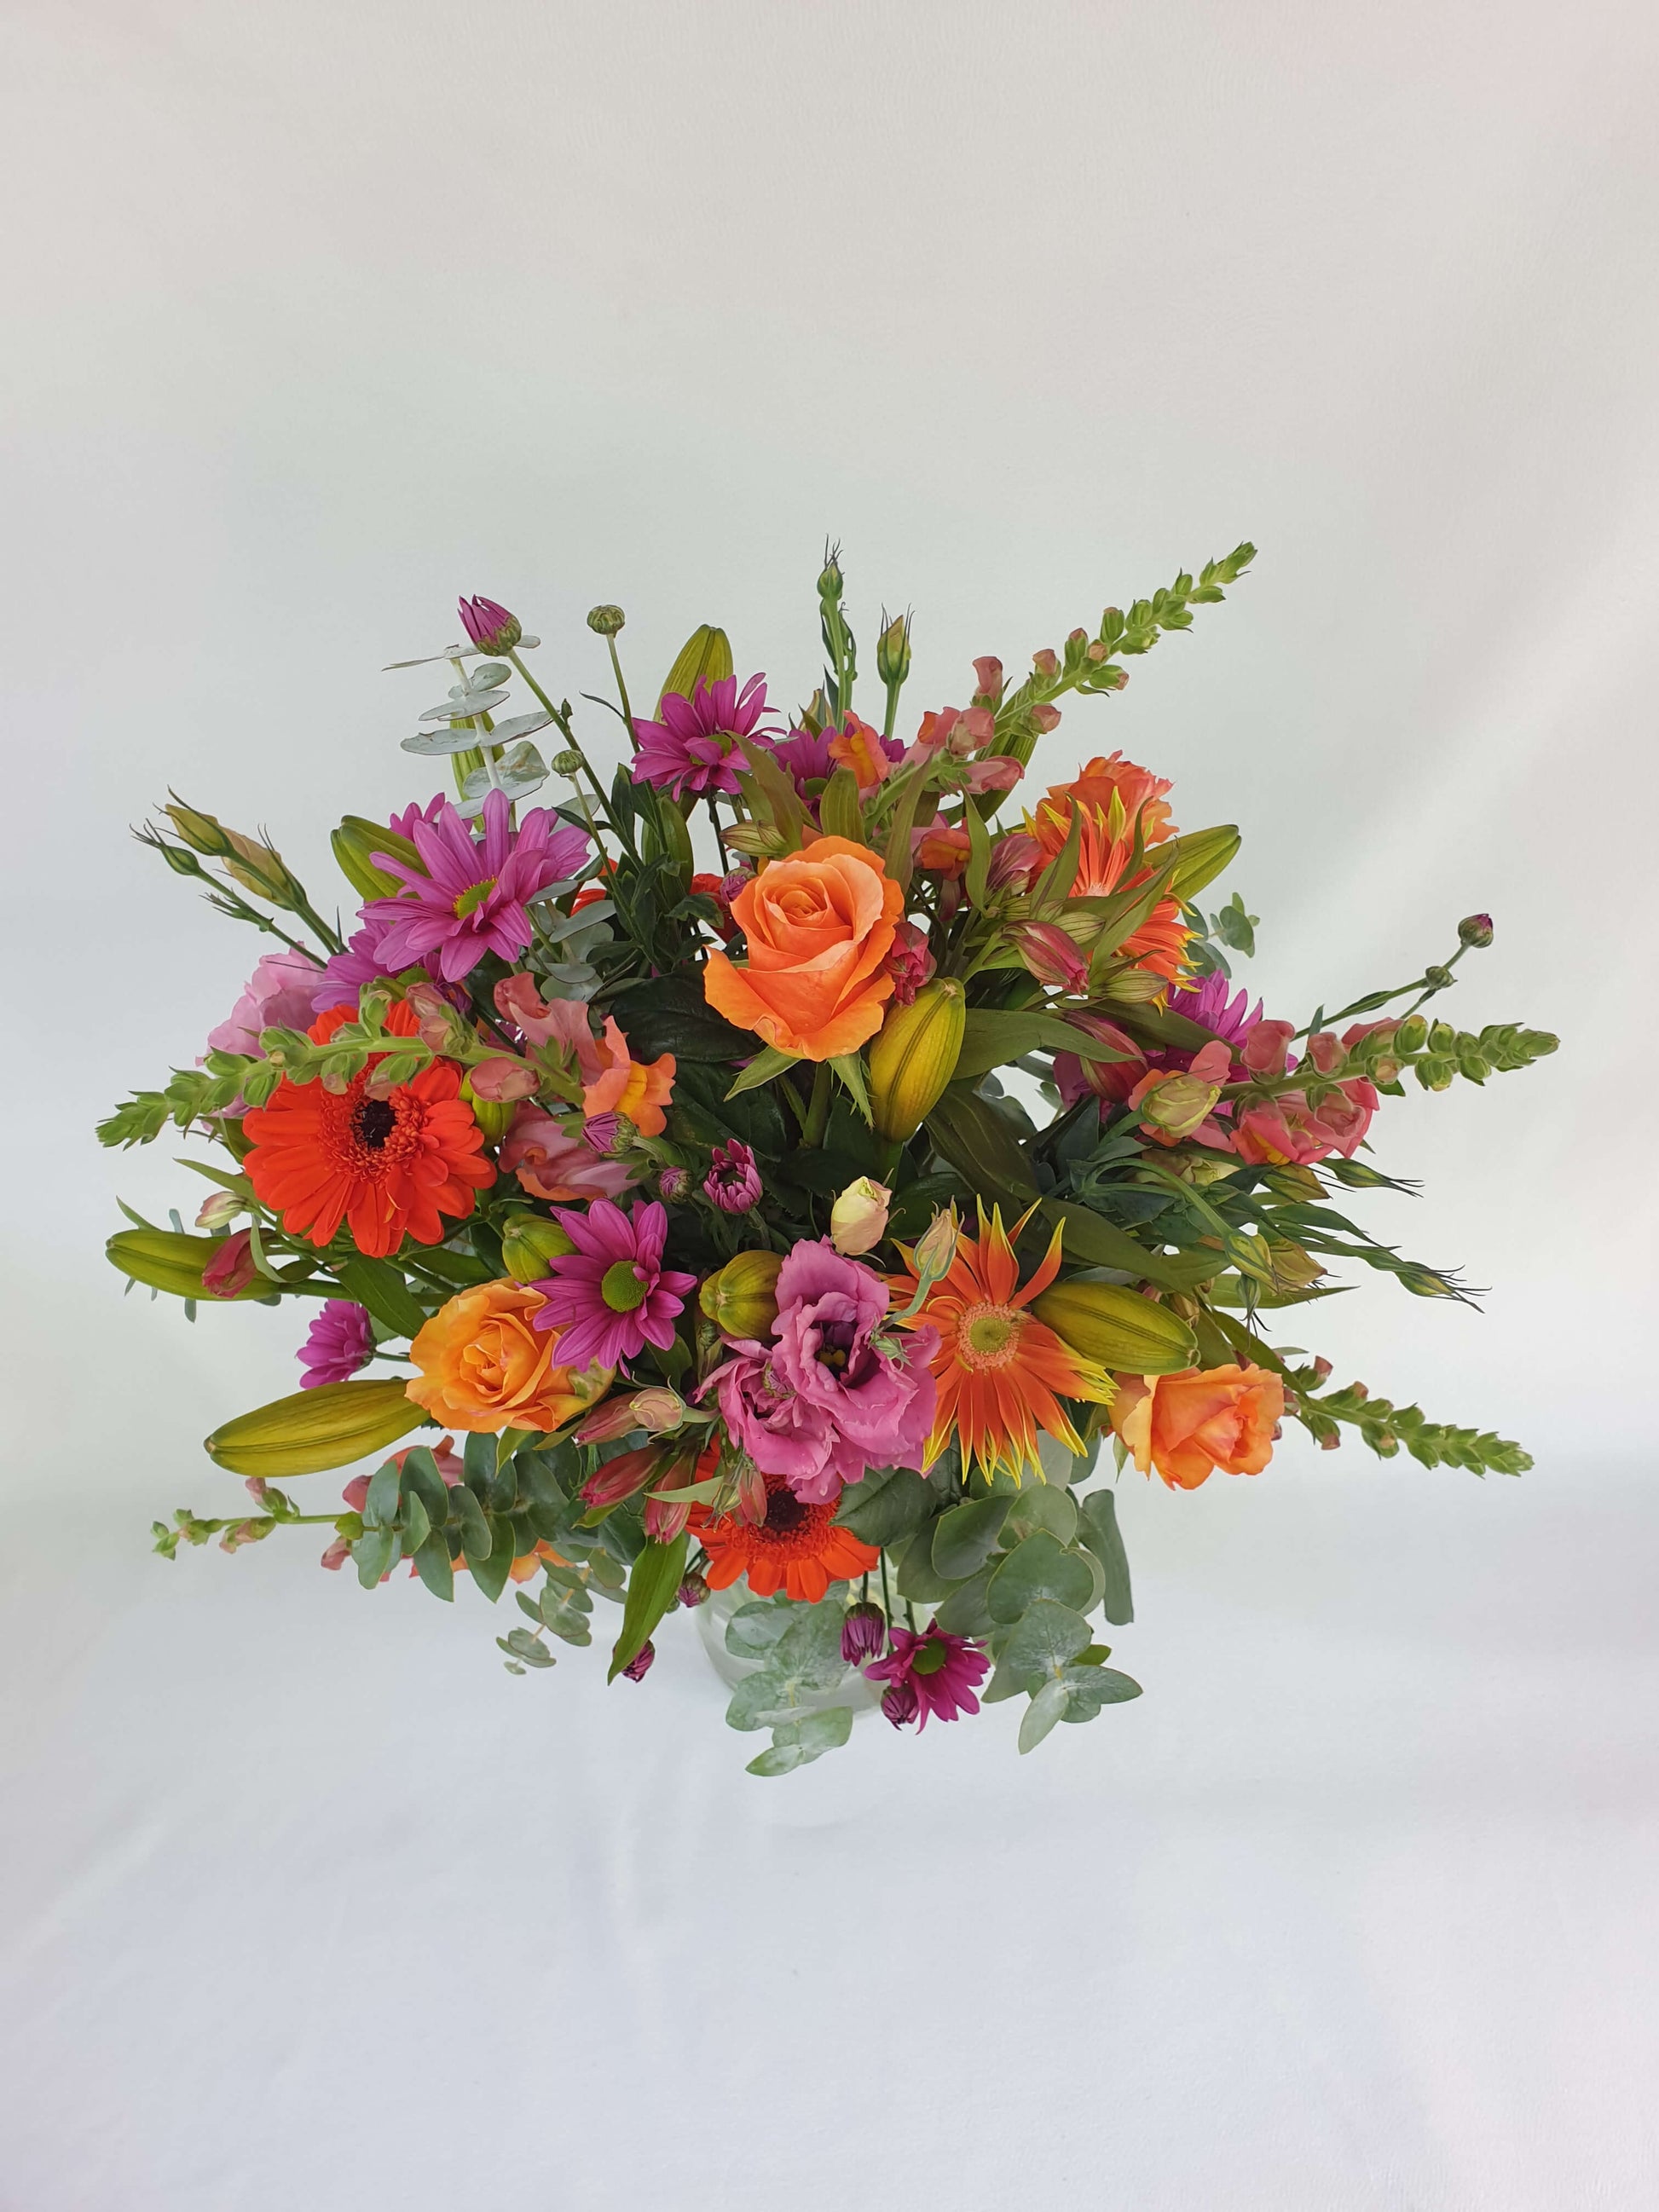 A pink and orange bouquet from above.